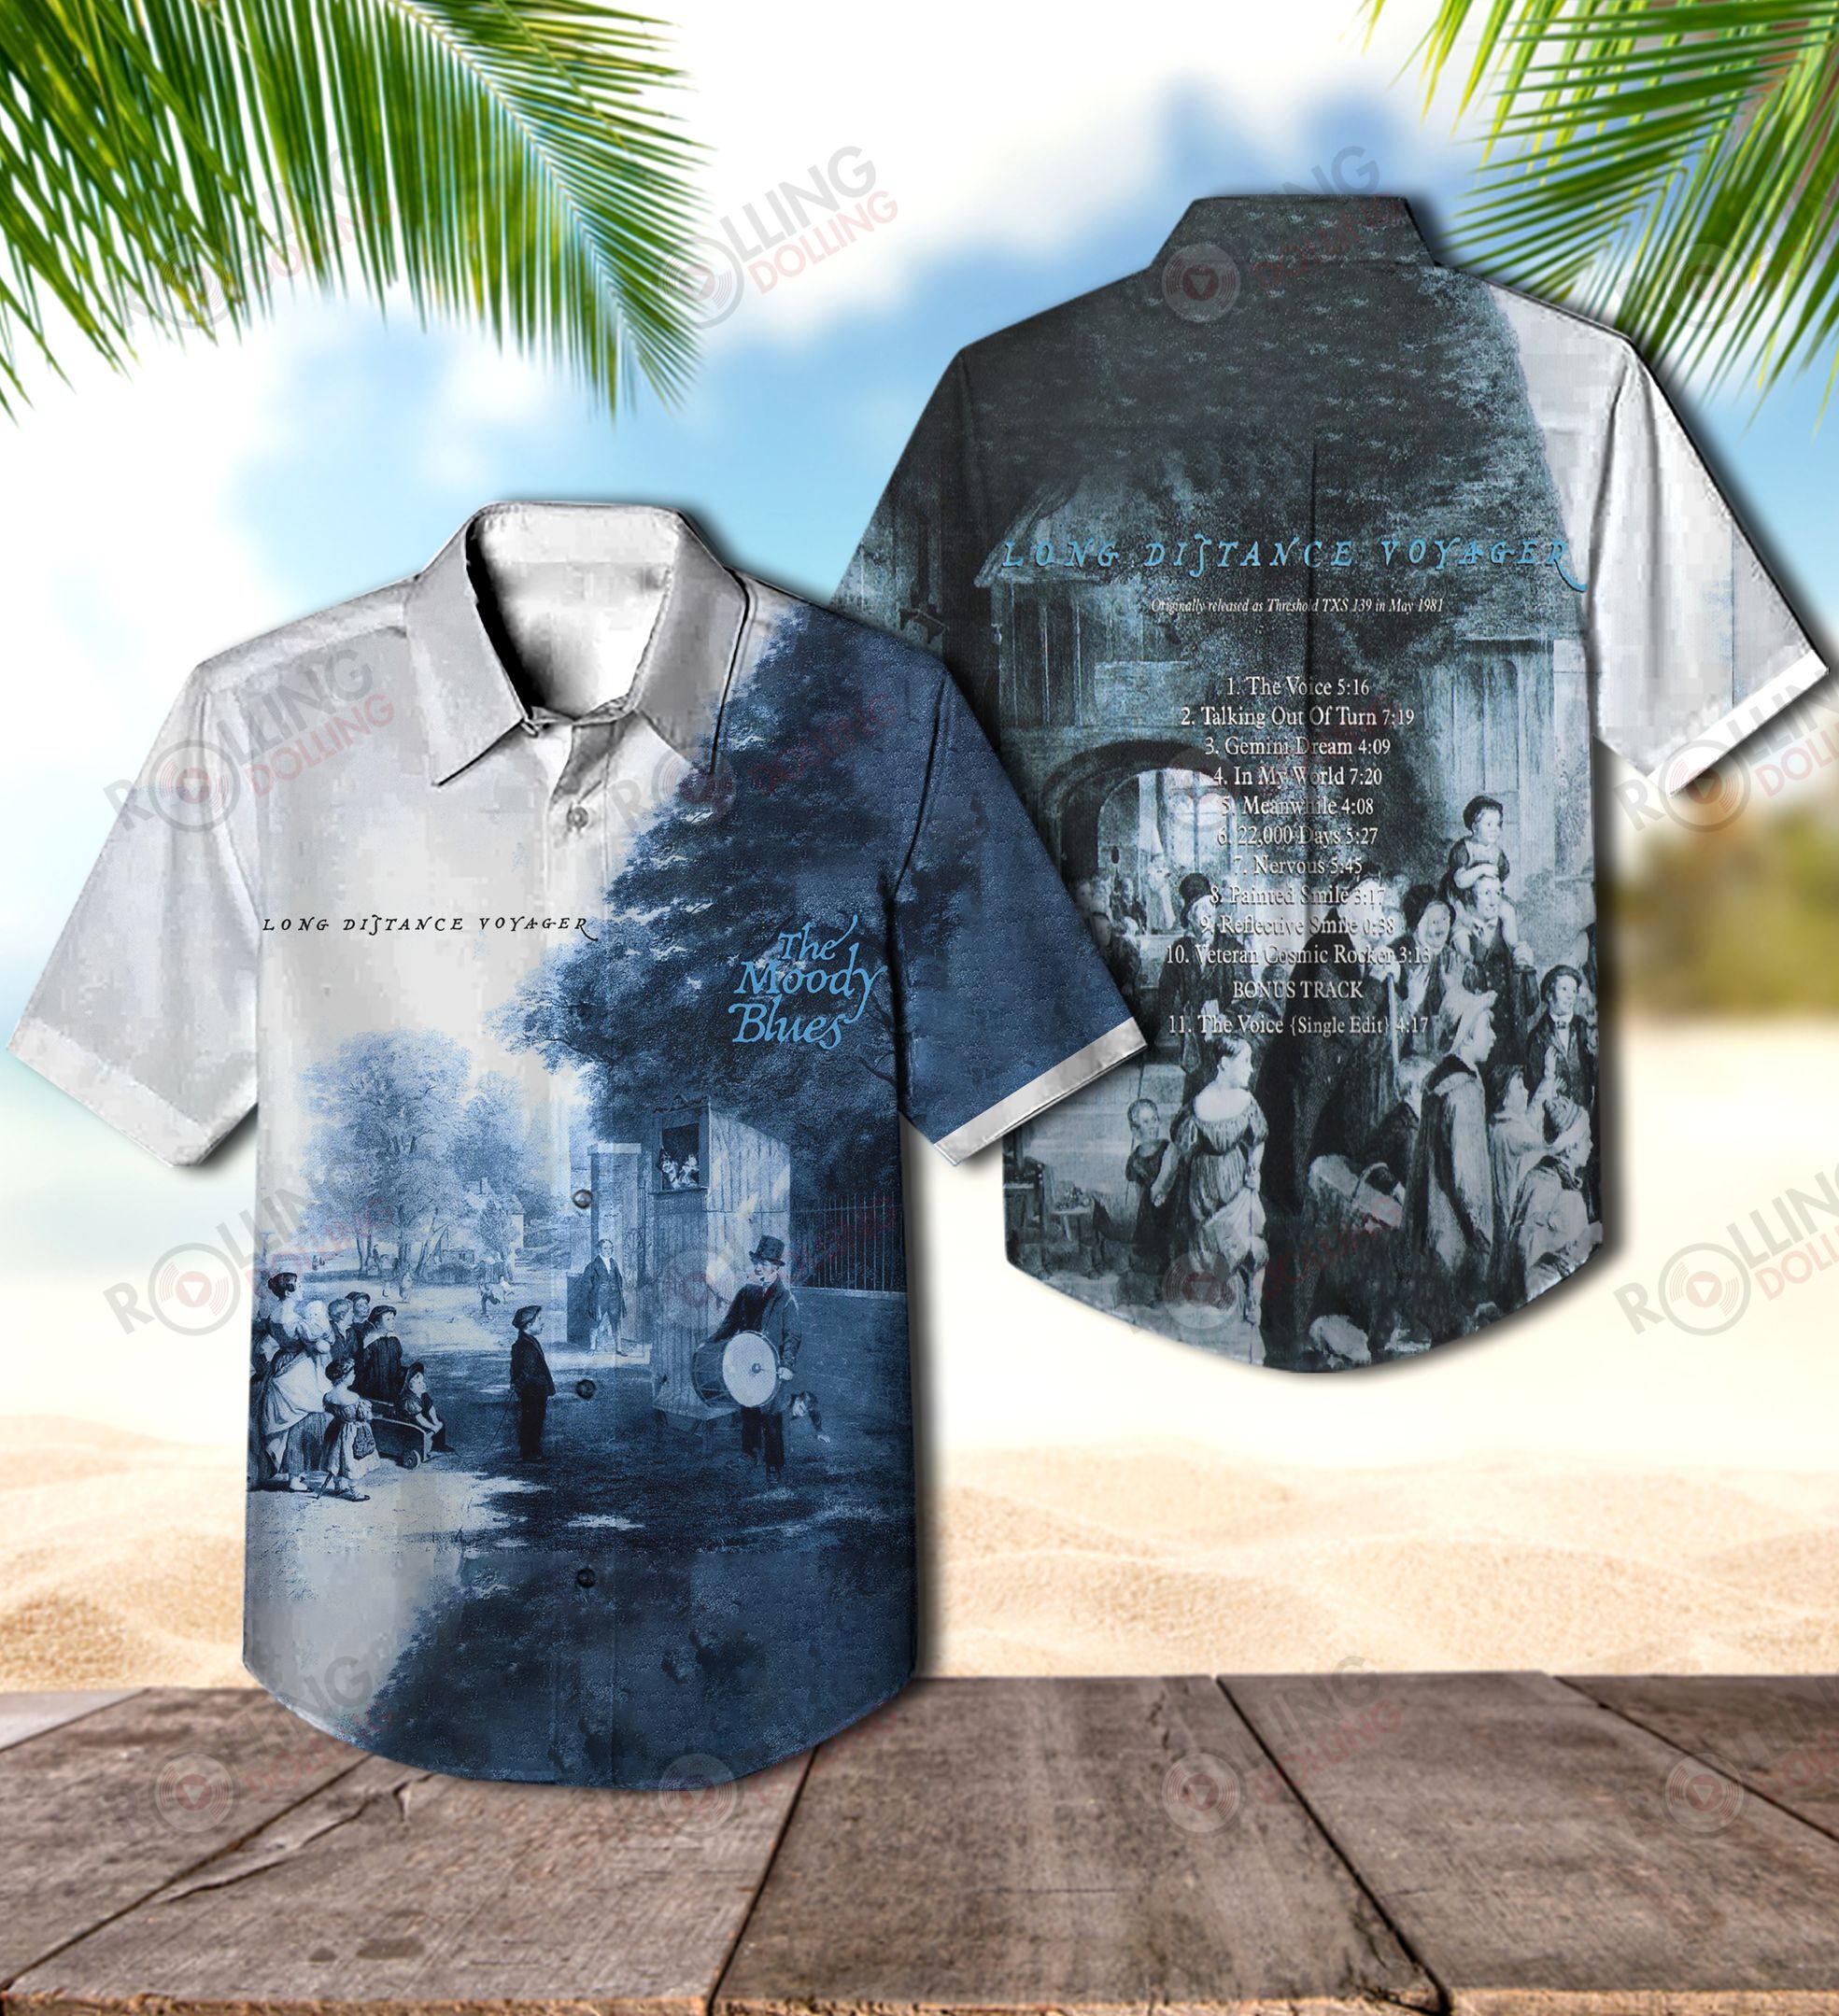 Check out these top 100+ Hawaiian shirt so cool for rock fans 357